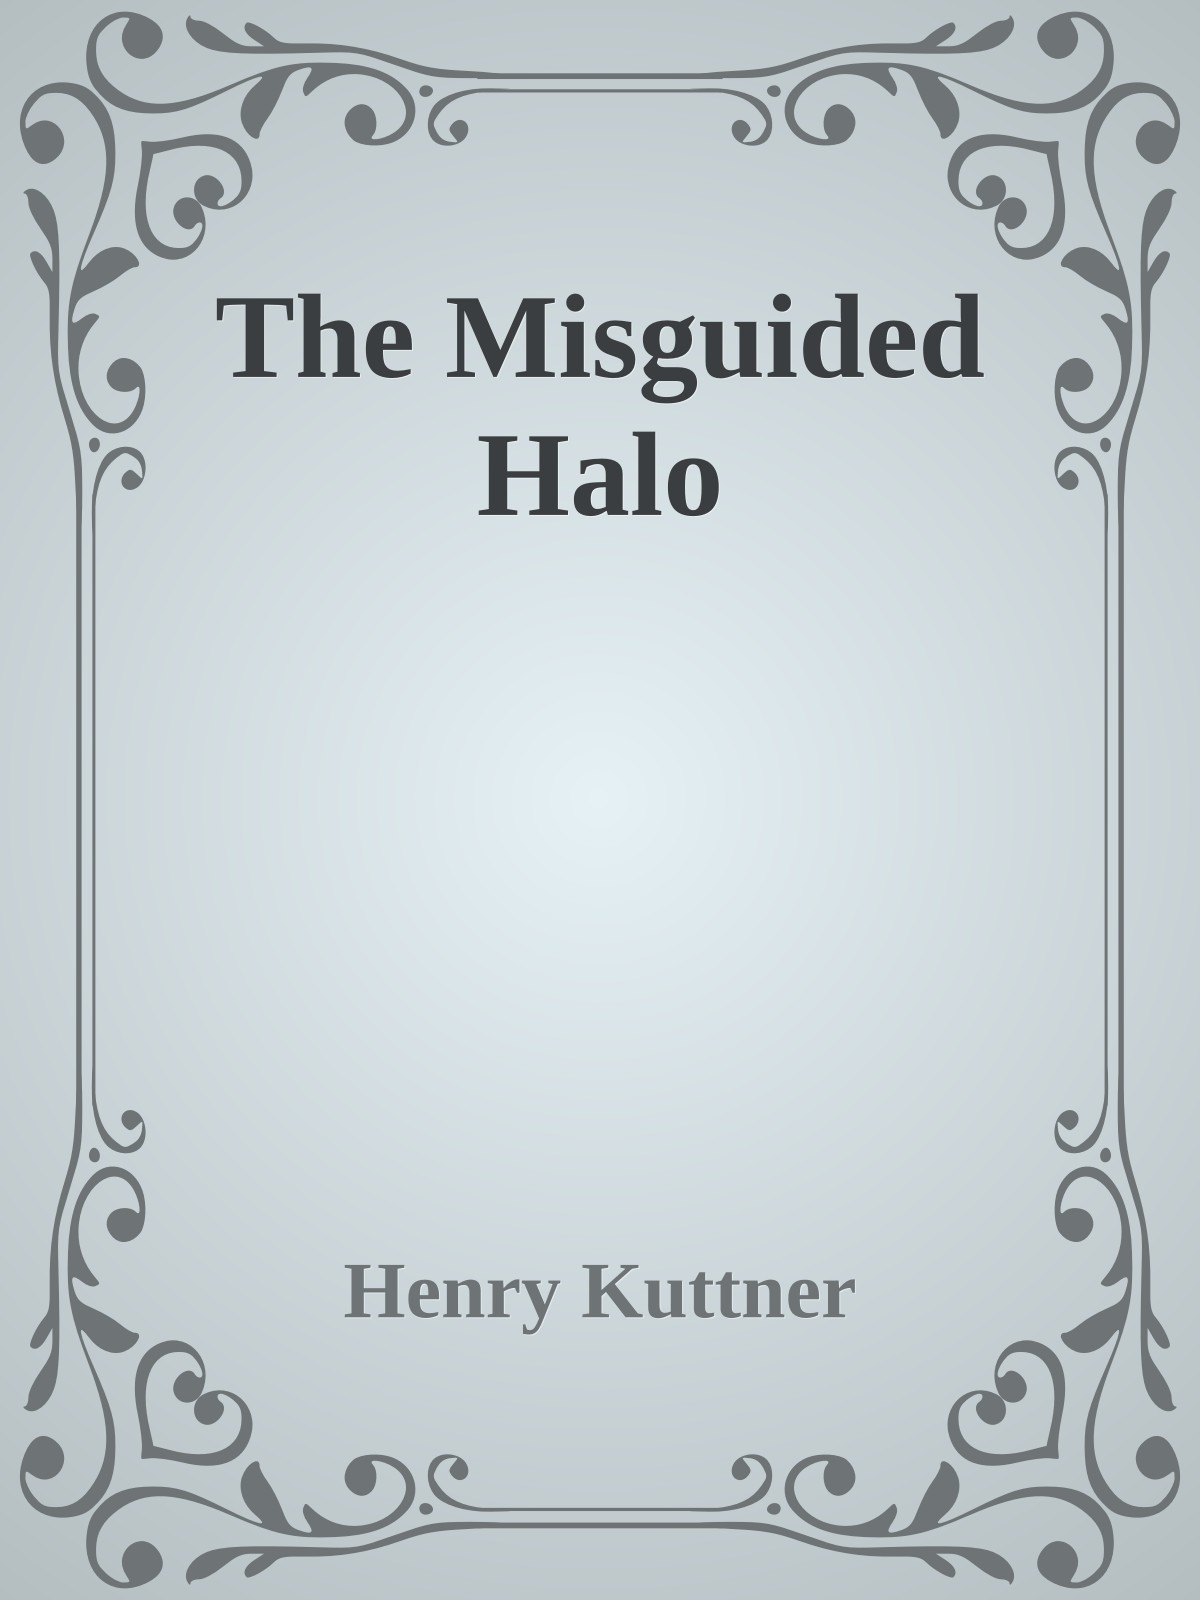 The Misguided Halo